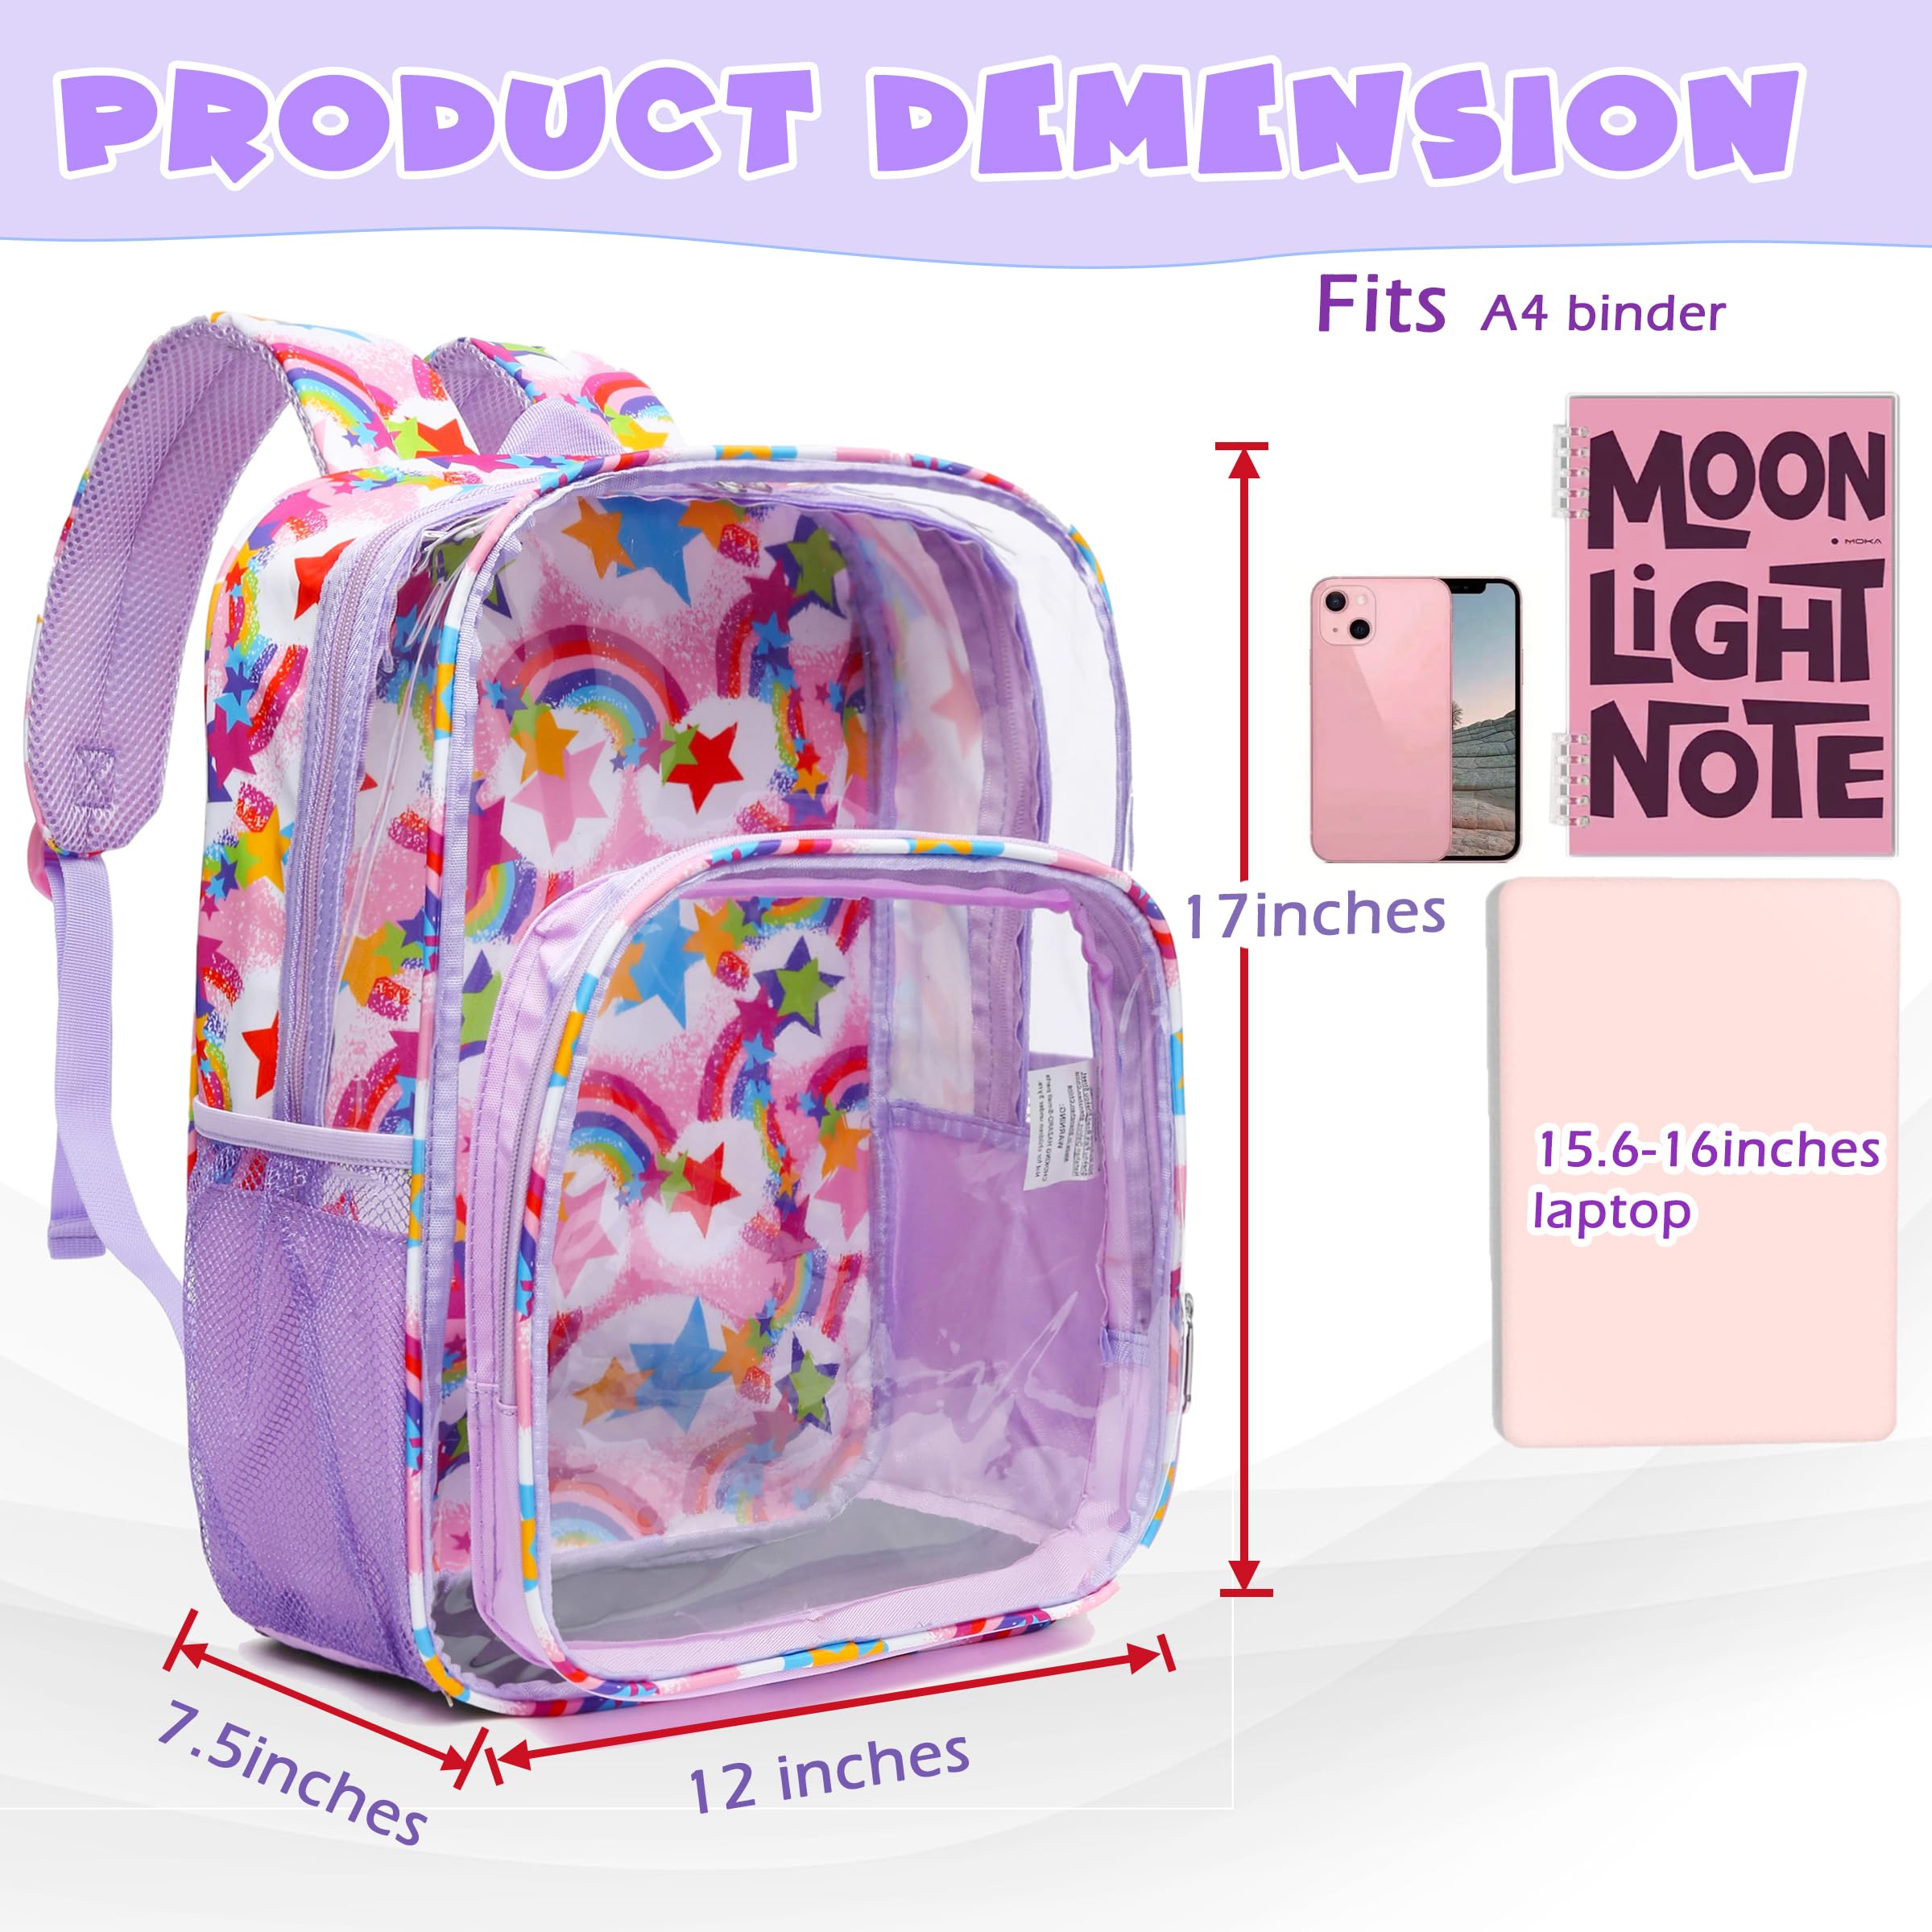 BLUEFAIRY Clear Backpack Heavy Duty PVC Transparent Backpack Clear Bag forSchool Concert Work Travel Sport Event Festival Games Venues for Adults Women Men Girls Boys with Mesh Pocket - Rainbow Star